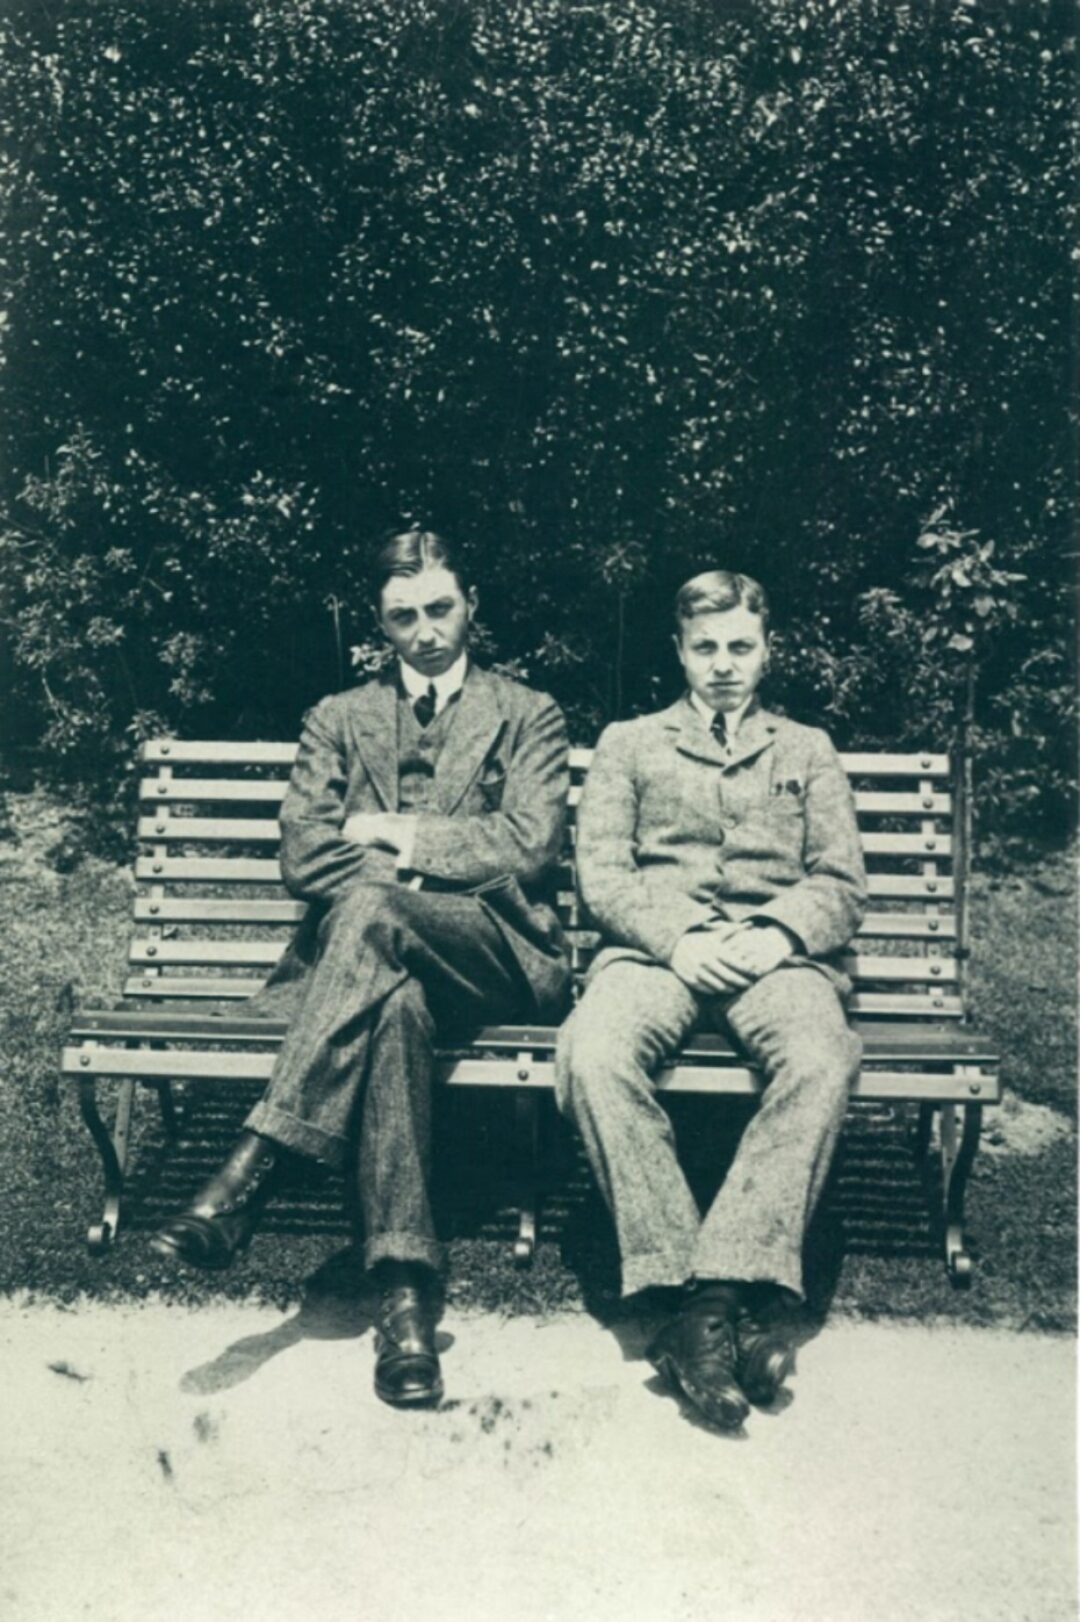 Thomas Eustace Vesey 1885 1946 seated right with older brother Osbert 1904